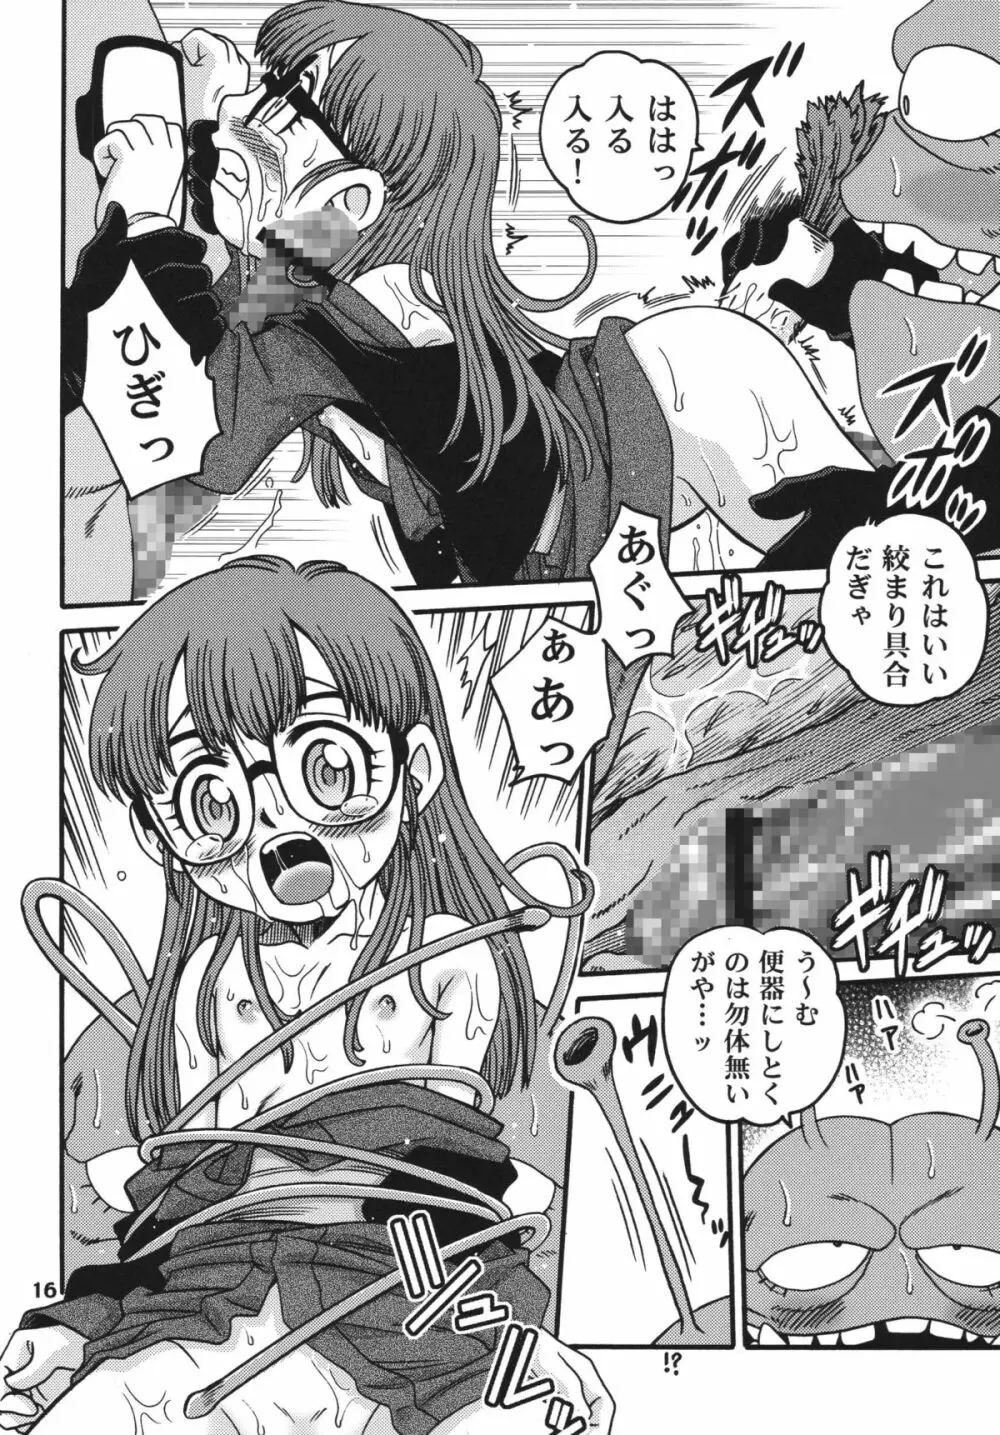 PROJECT ARALE 2 - page16